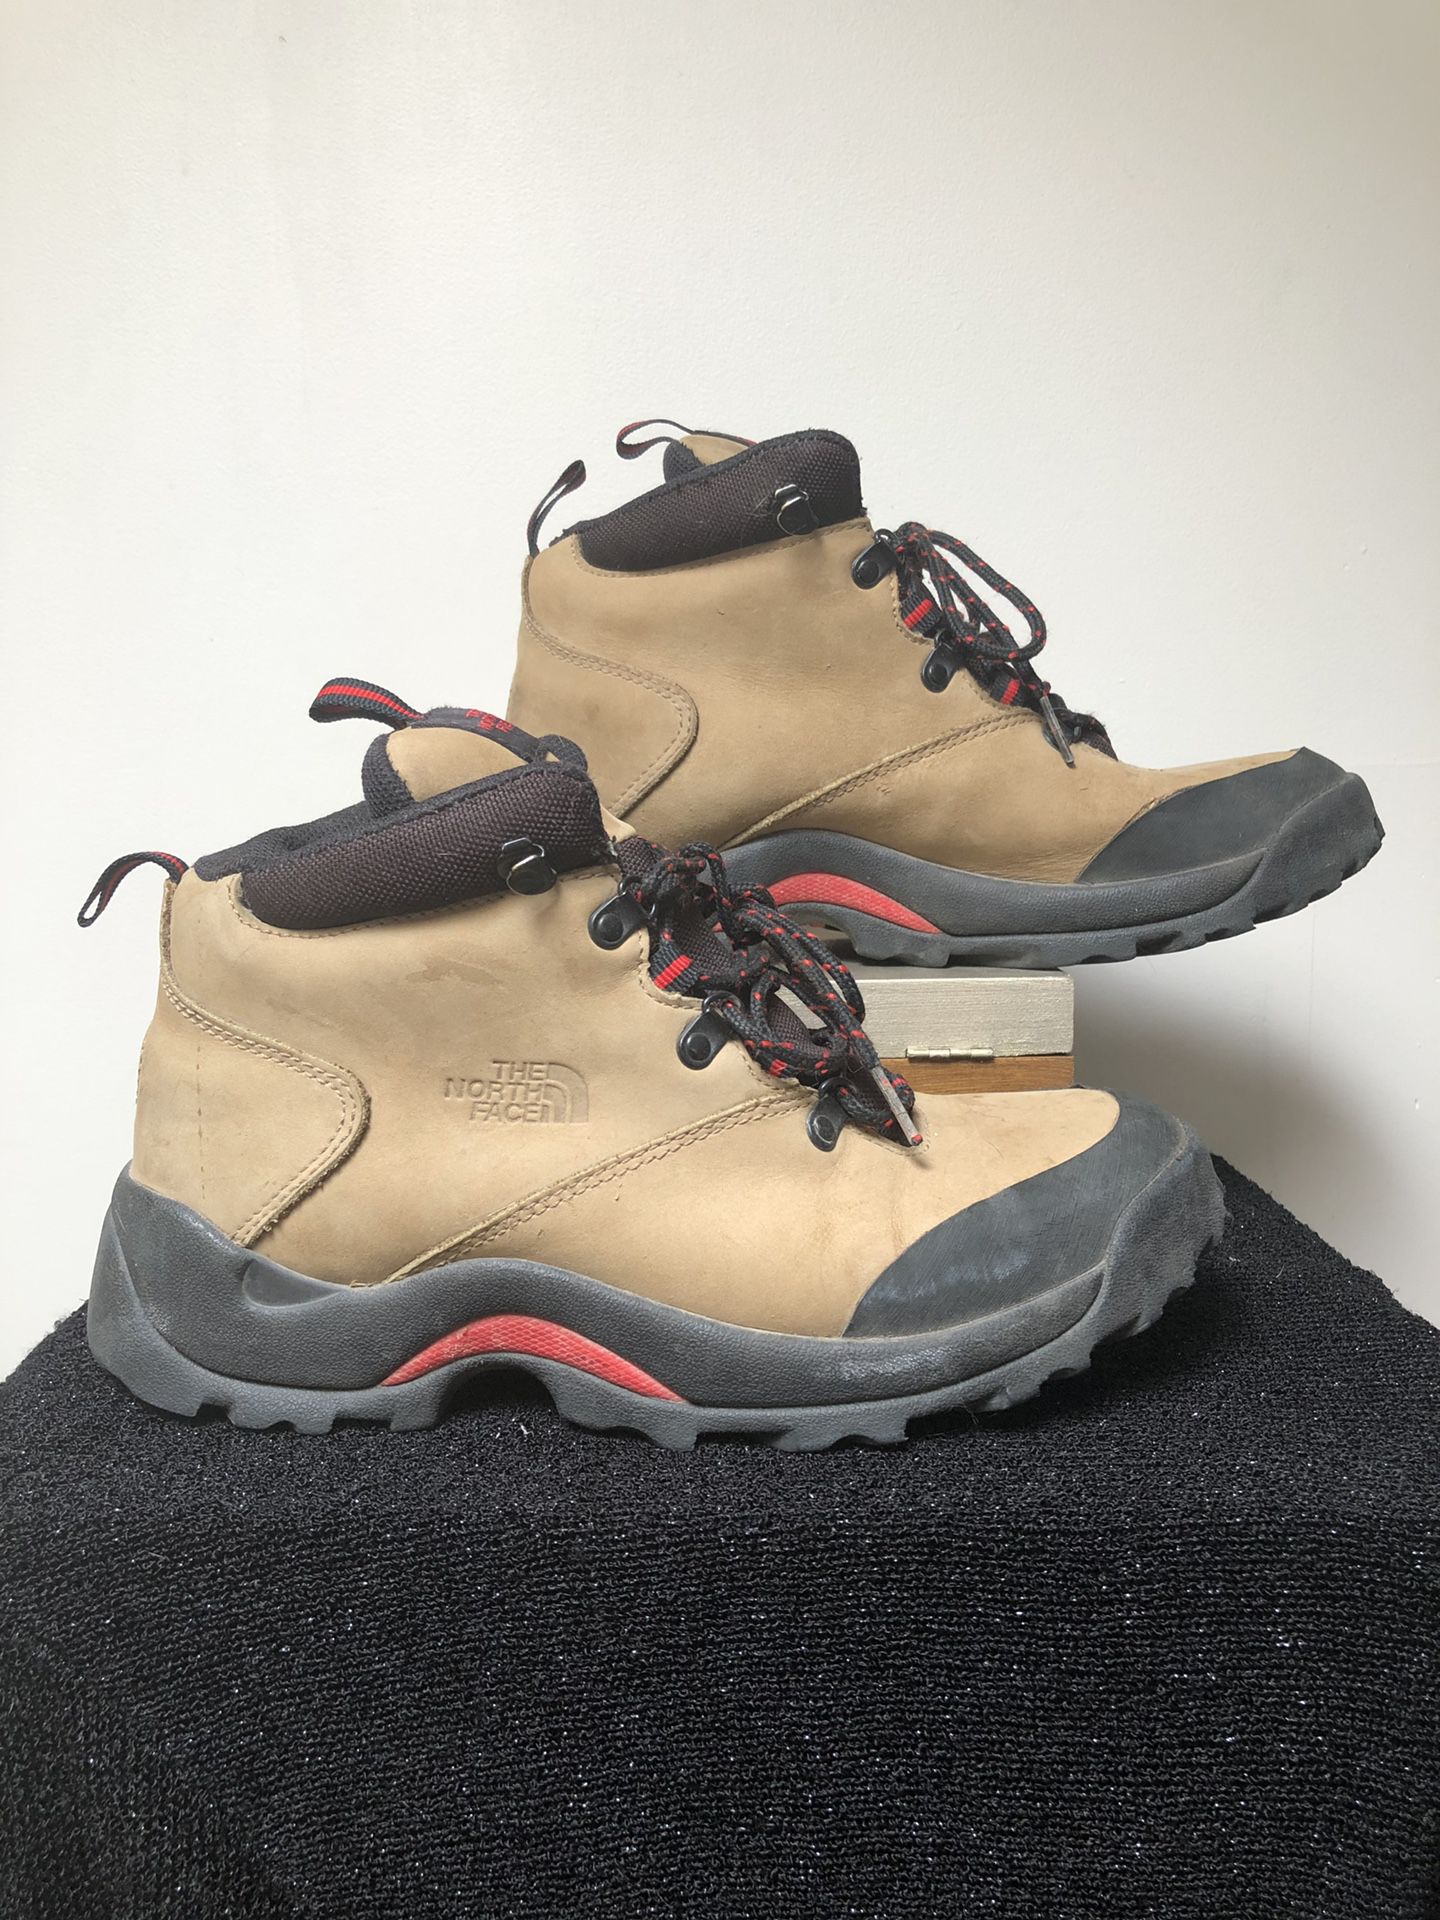 THE NORTH FACE women’s waterproof boot size 9.5